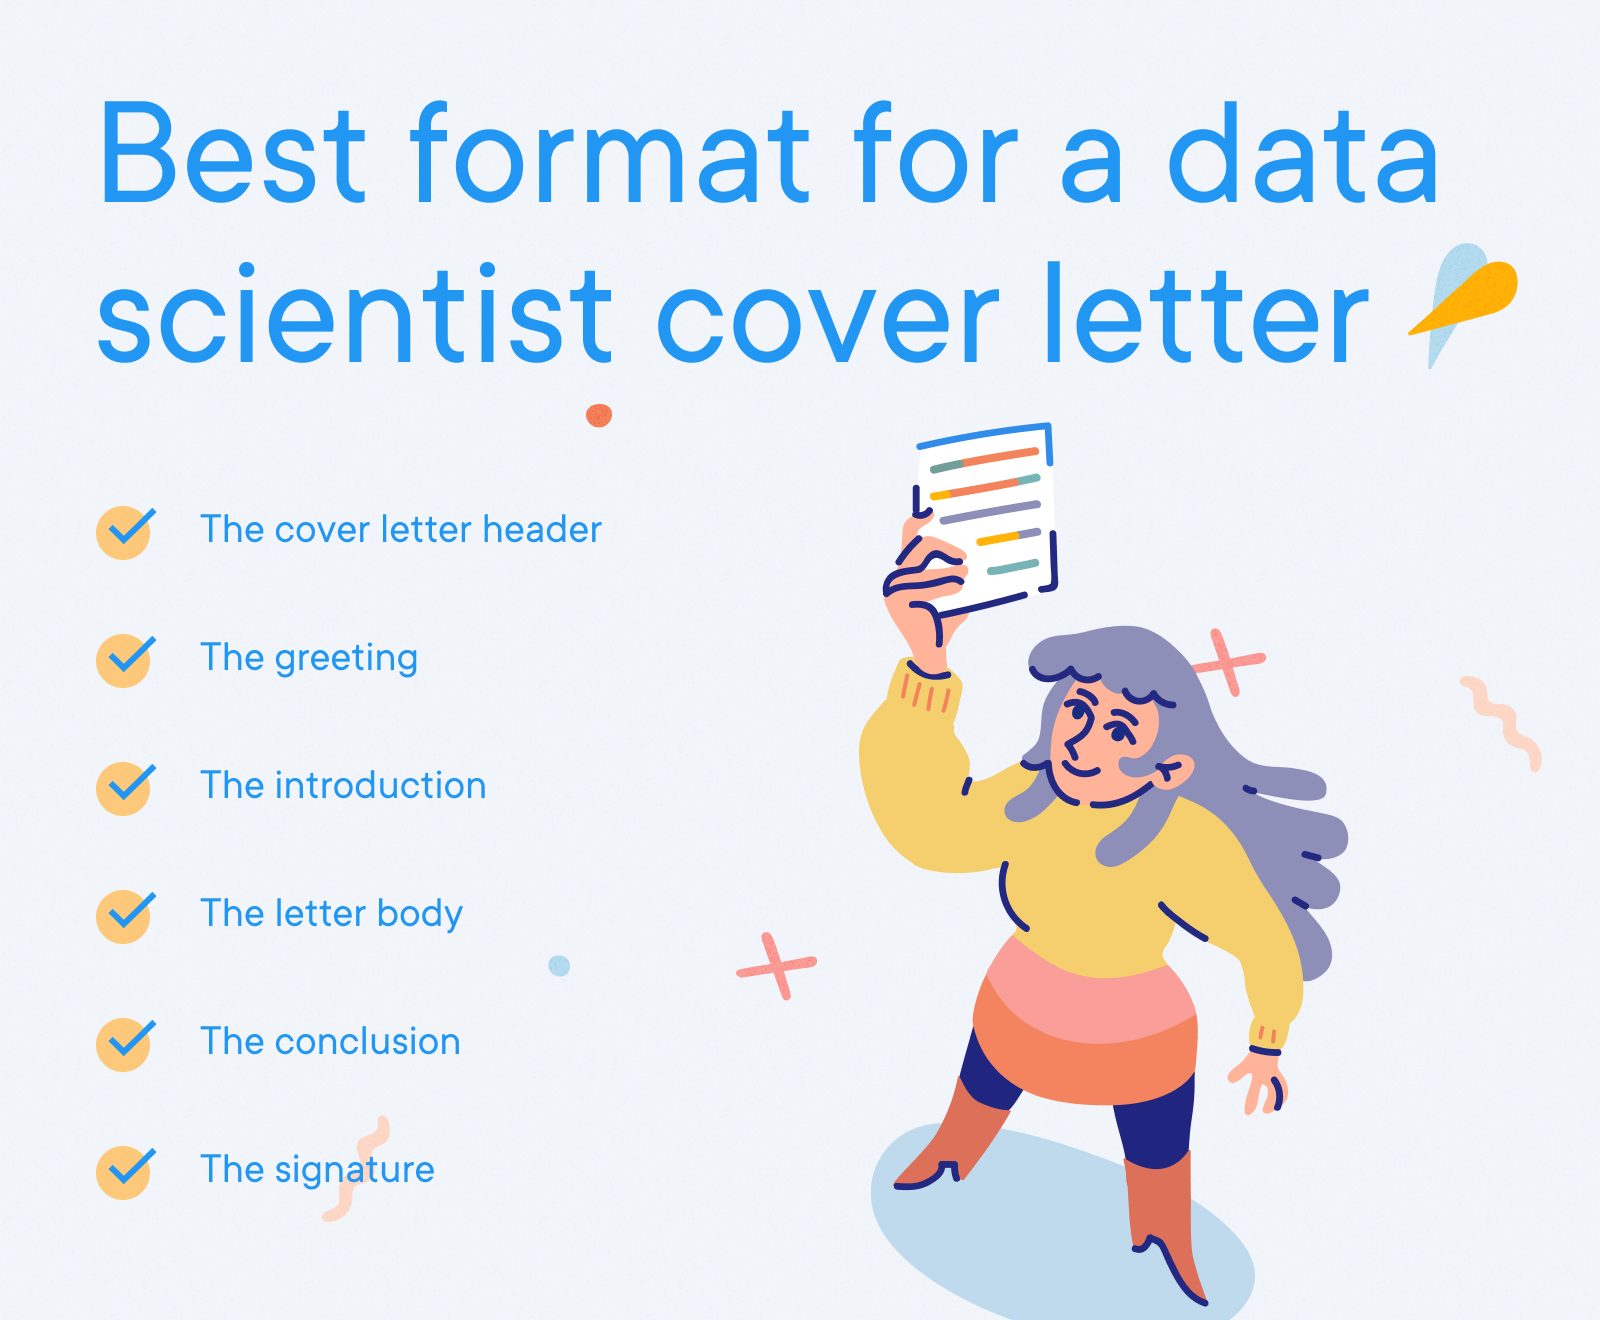 Data Scientist - Best format for a data scientist cover letter